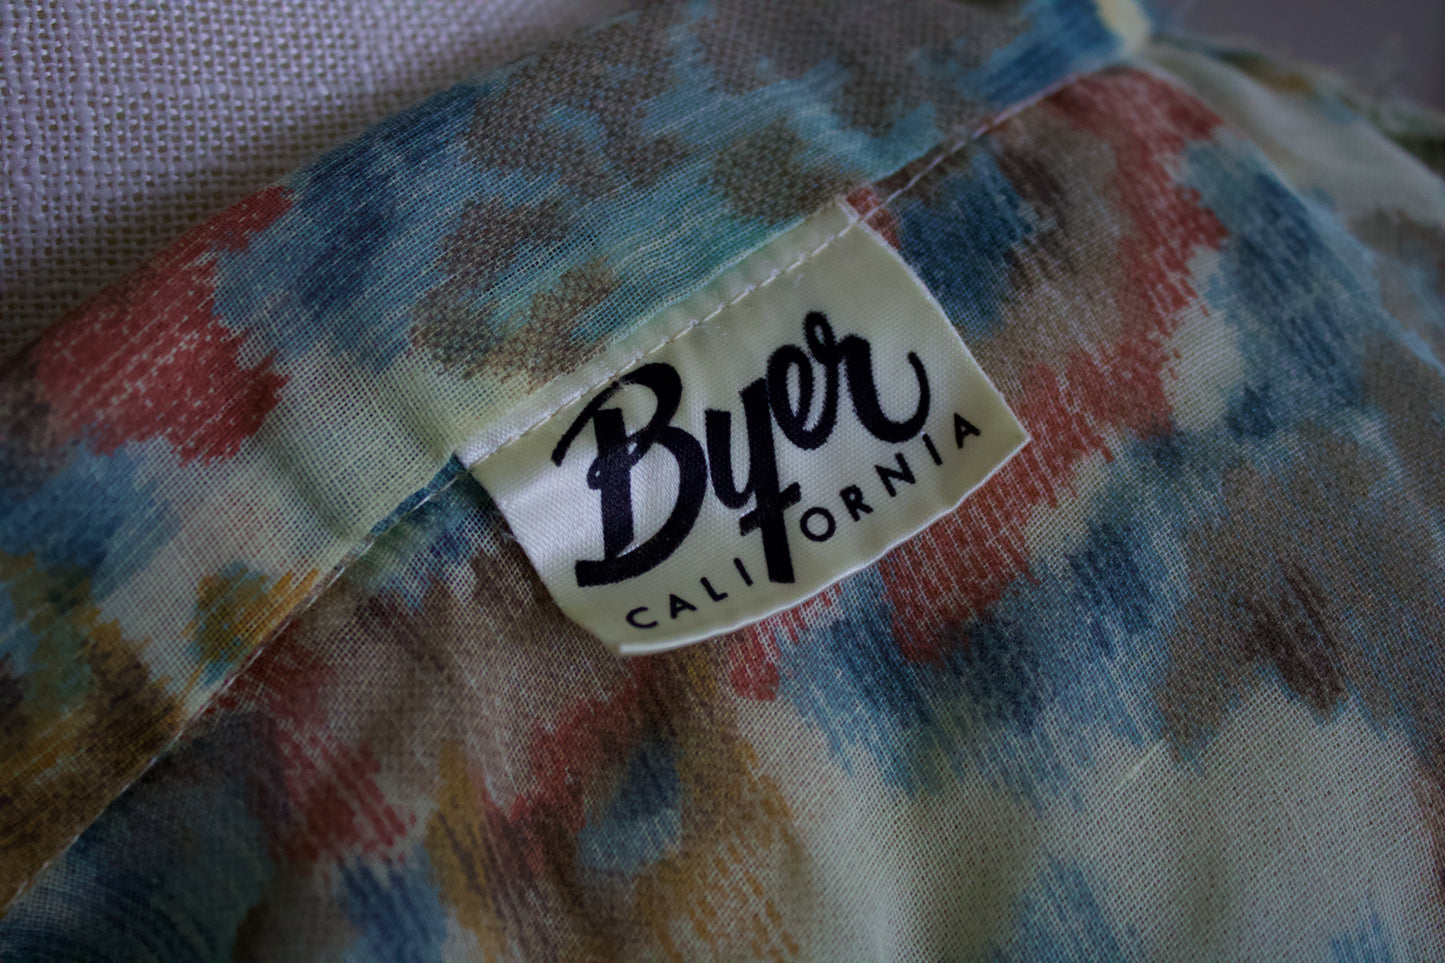 1970s Byer Crop Top with Tie in Multicolor Watercolor Floral Pattern in Blues, Browns, Teds and Yellow